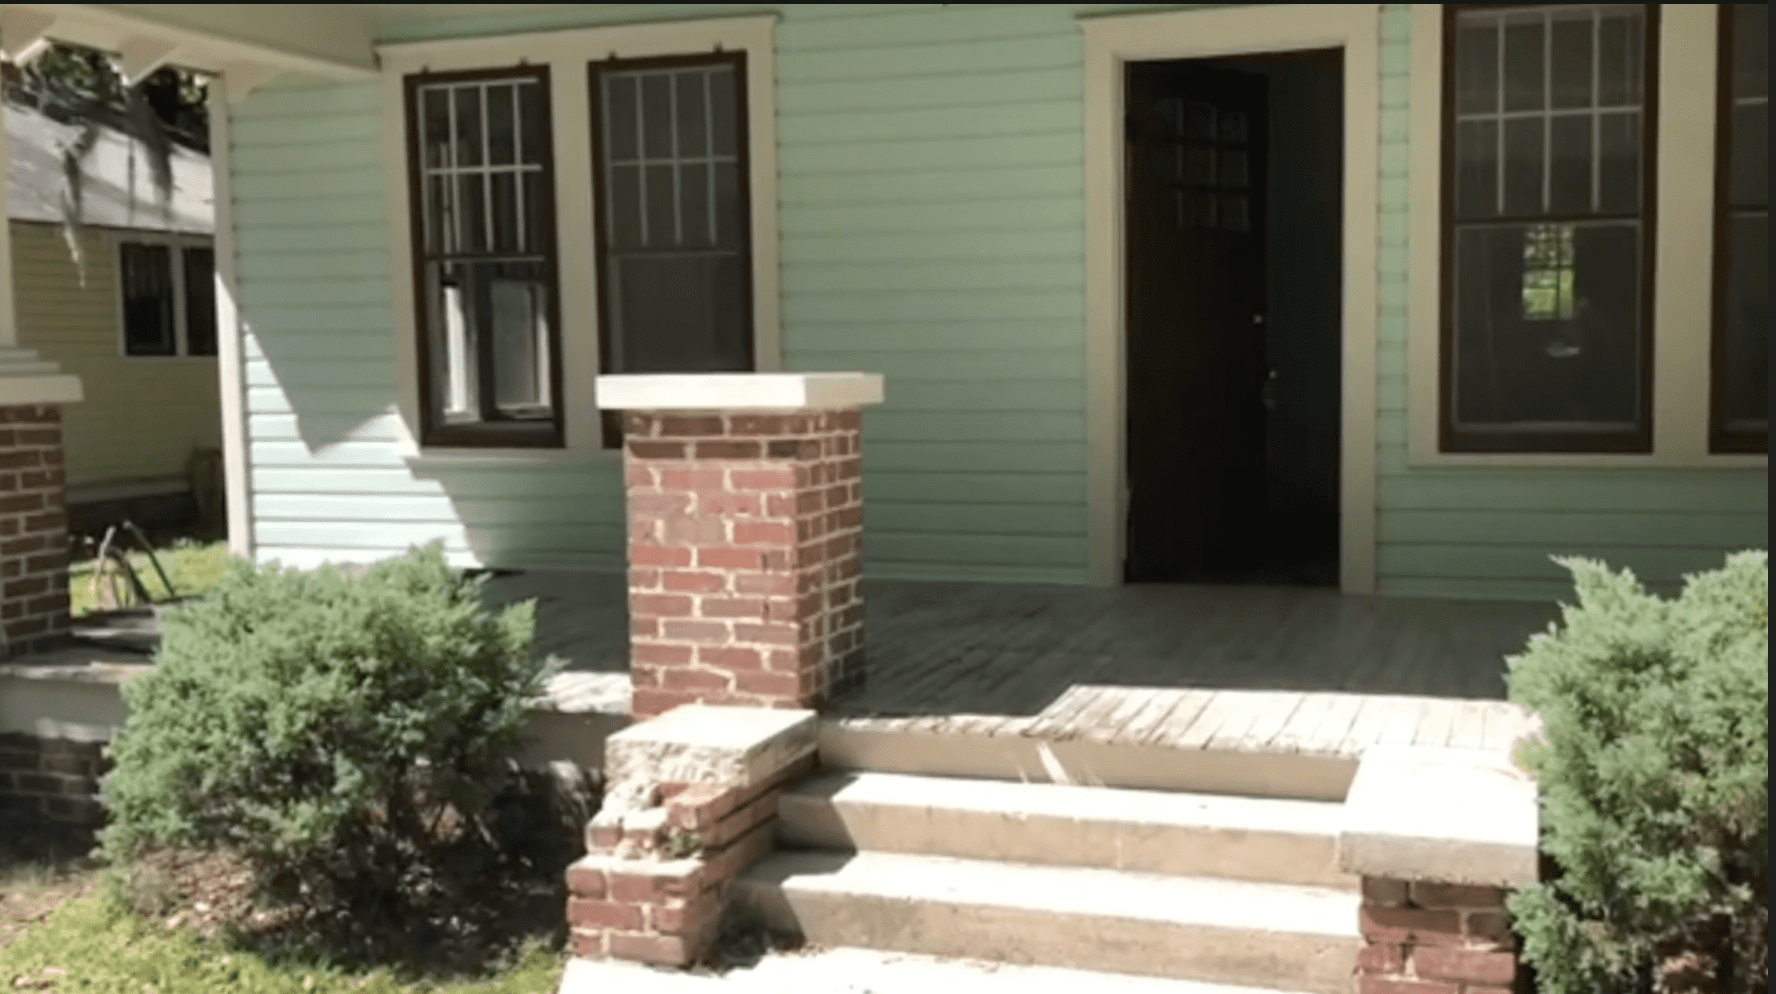 Stair and front porch repairs and renovations